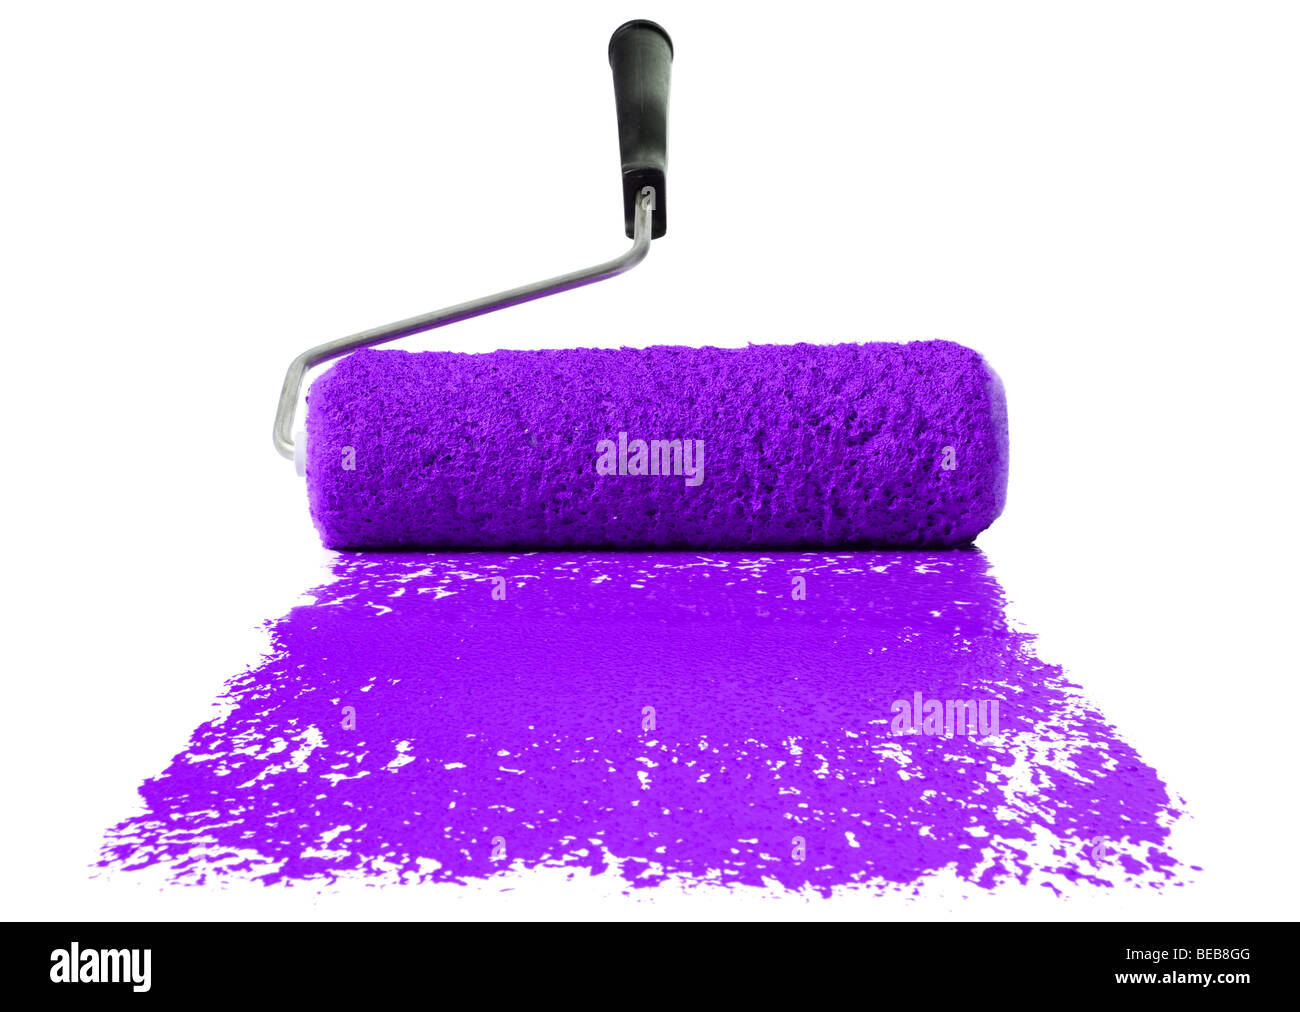 Paint roller With purple paint isolated over white background Stock Photo